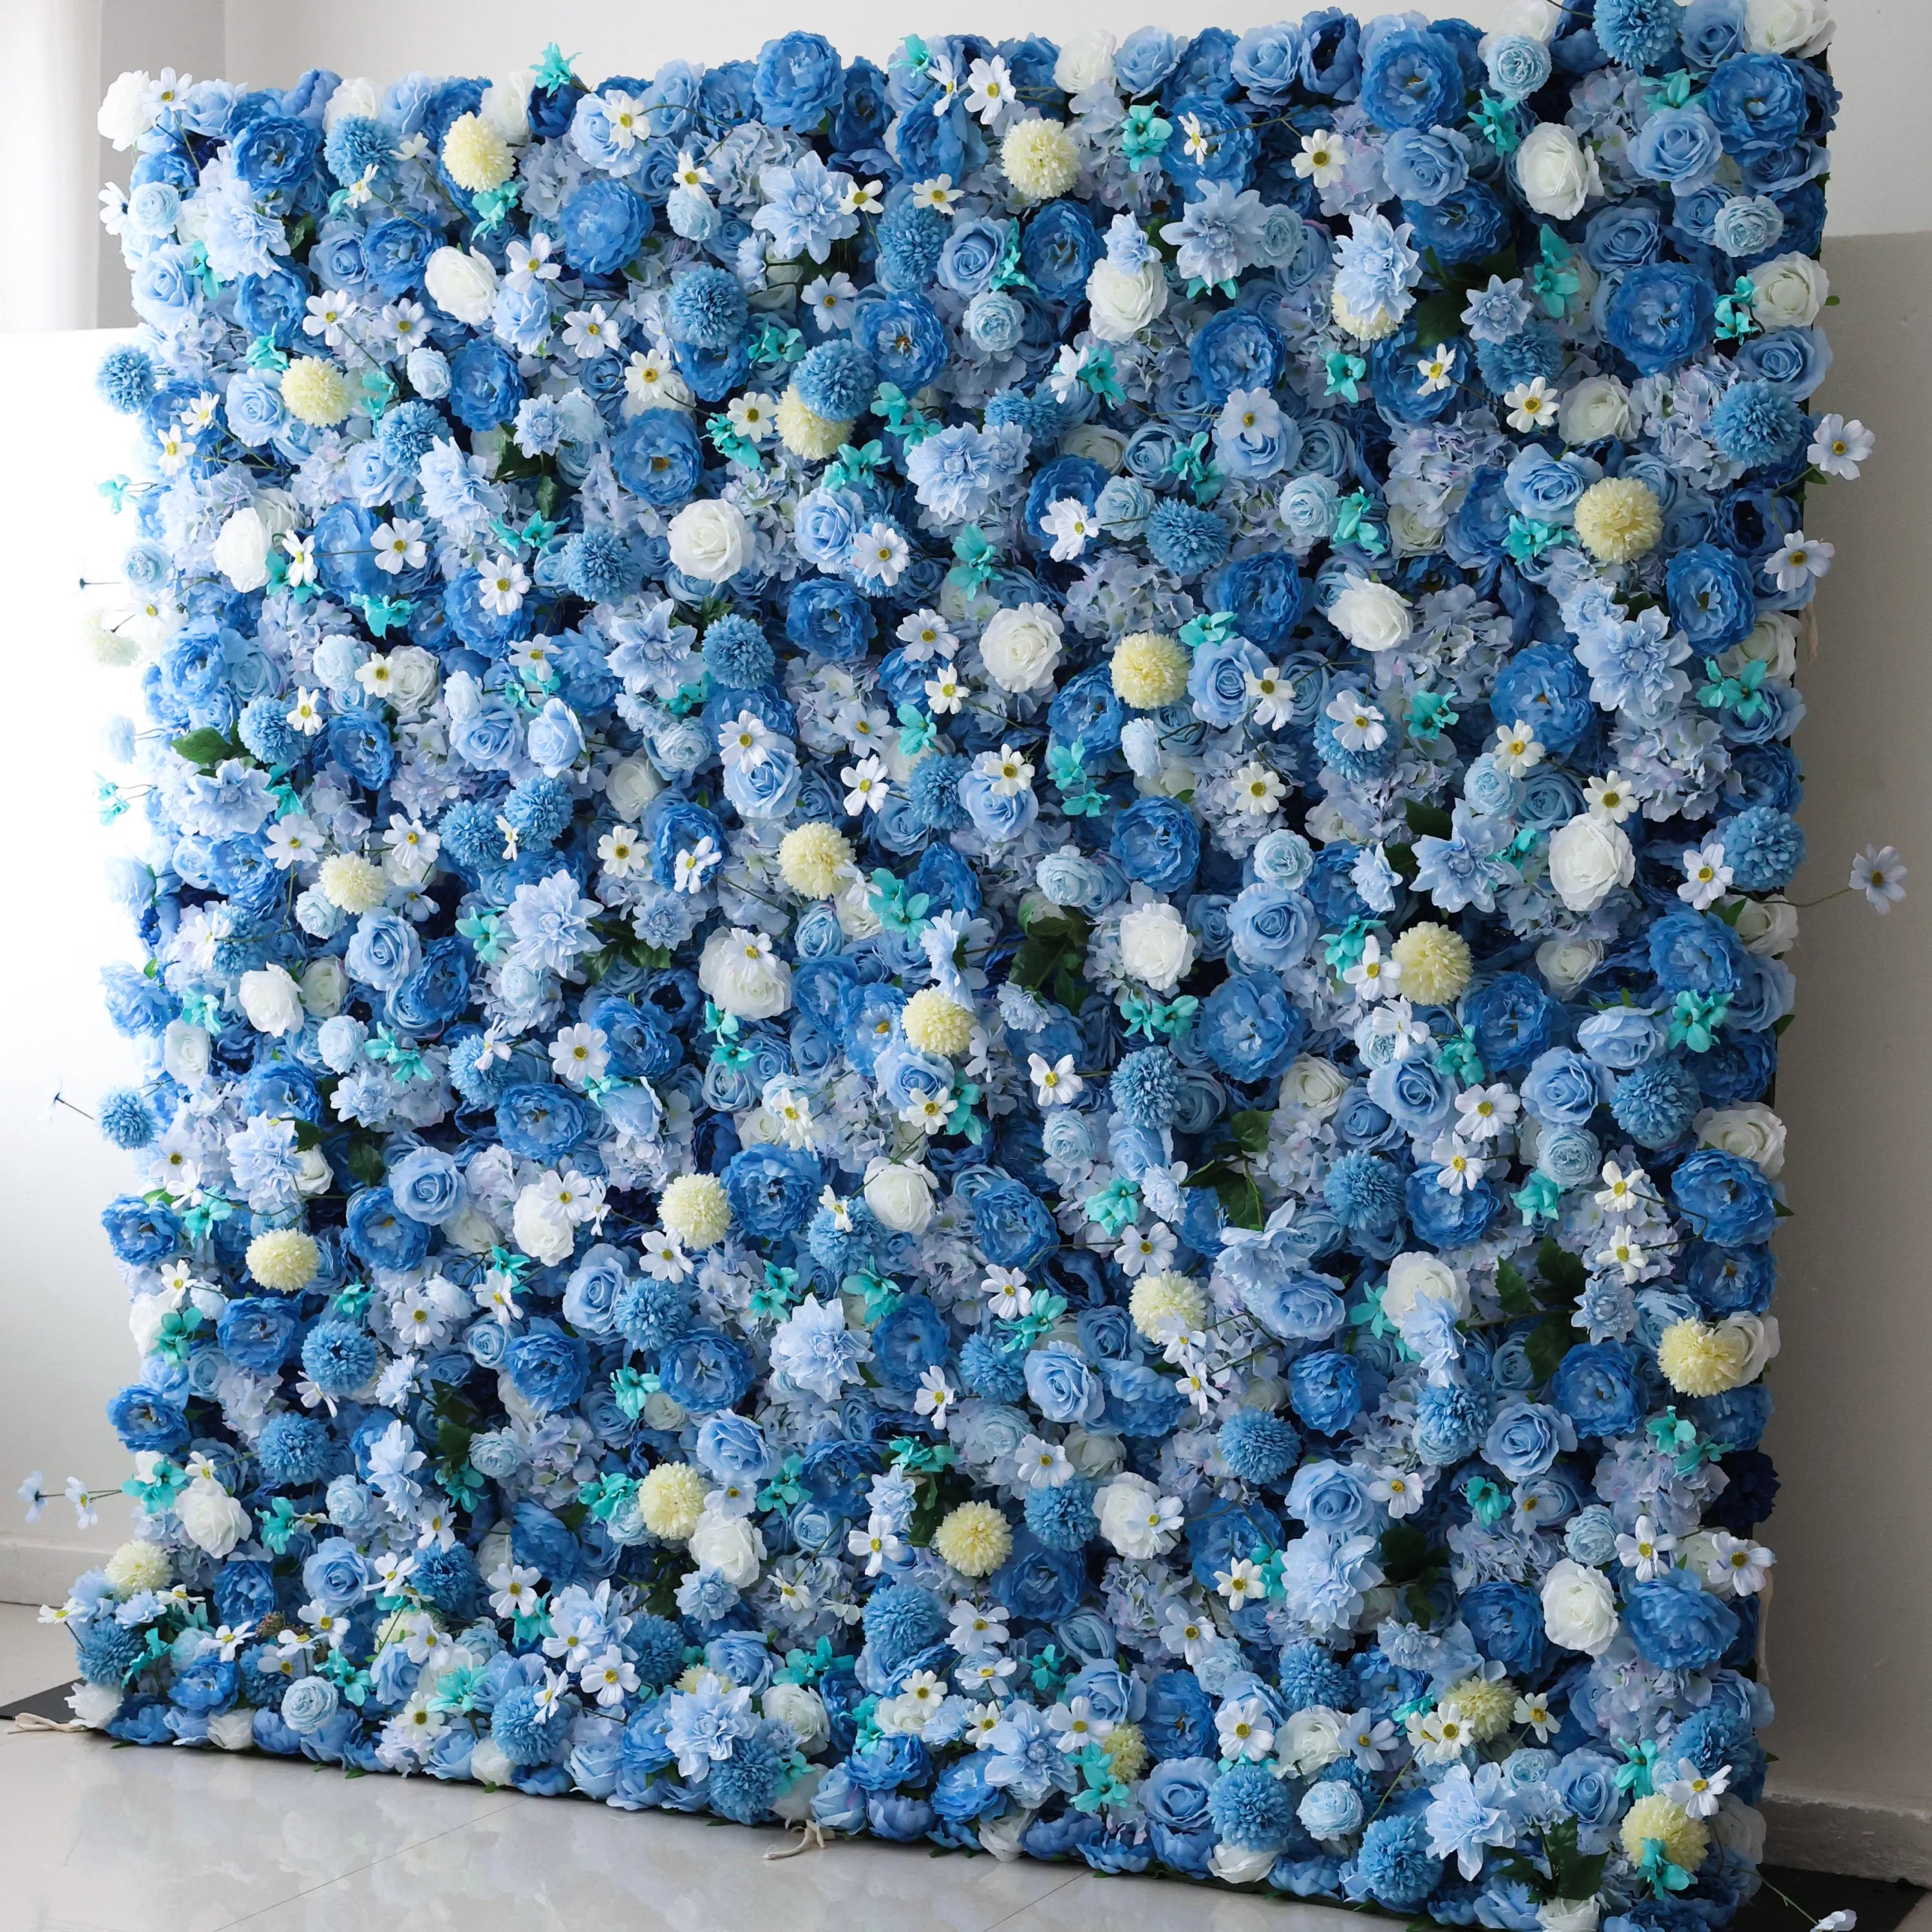 Valar Flowers' Cerulean Dreamscape: Immerse in a sea of rich blue and creamy white blossoms, evoking serene coastal horizons. Ideal for marine-themed events.